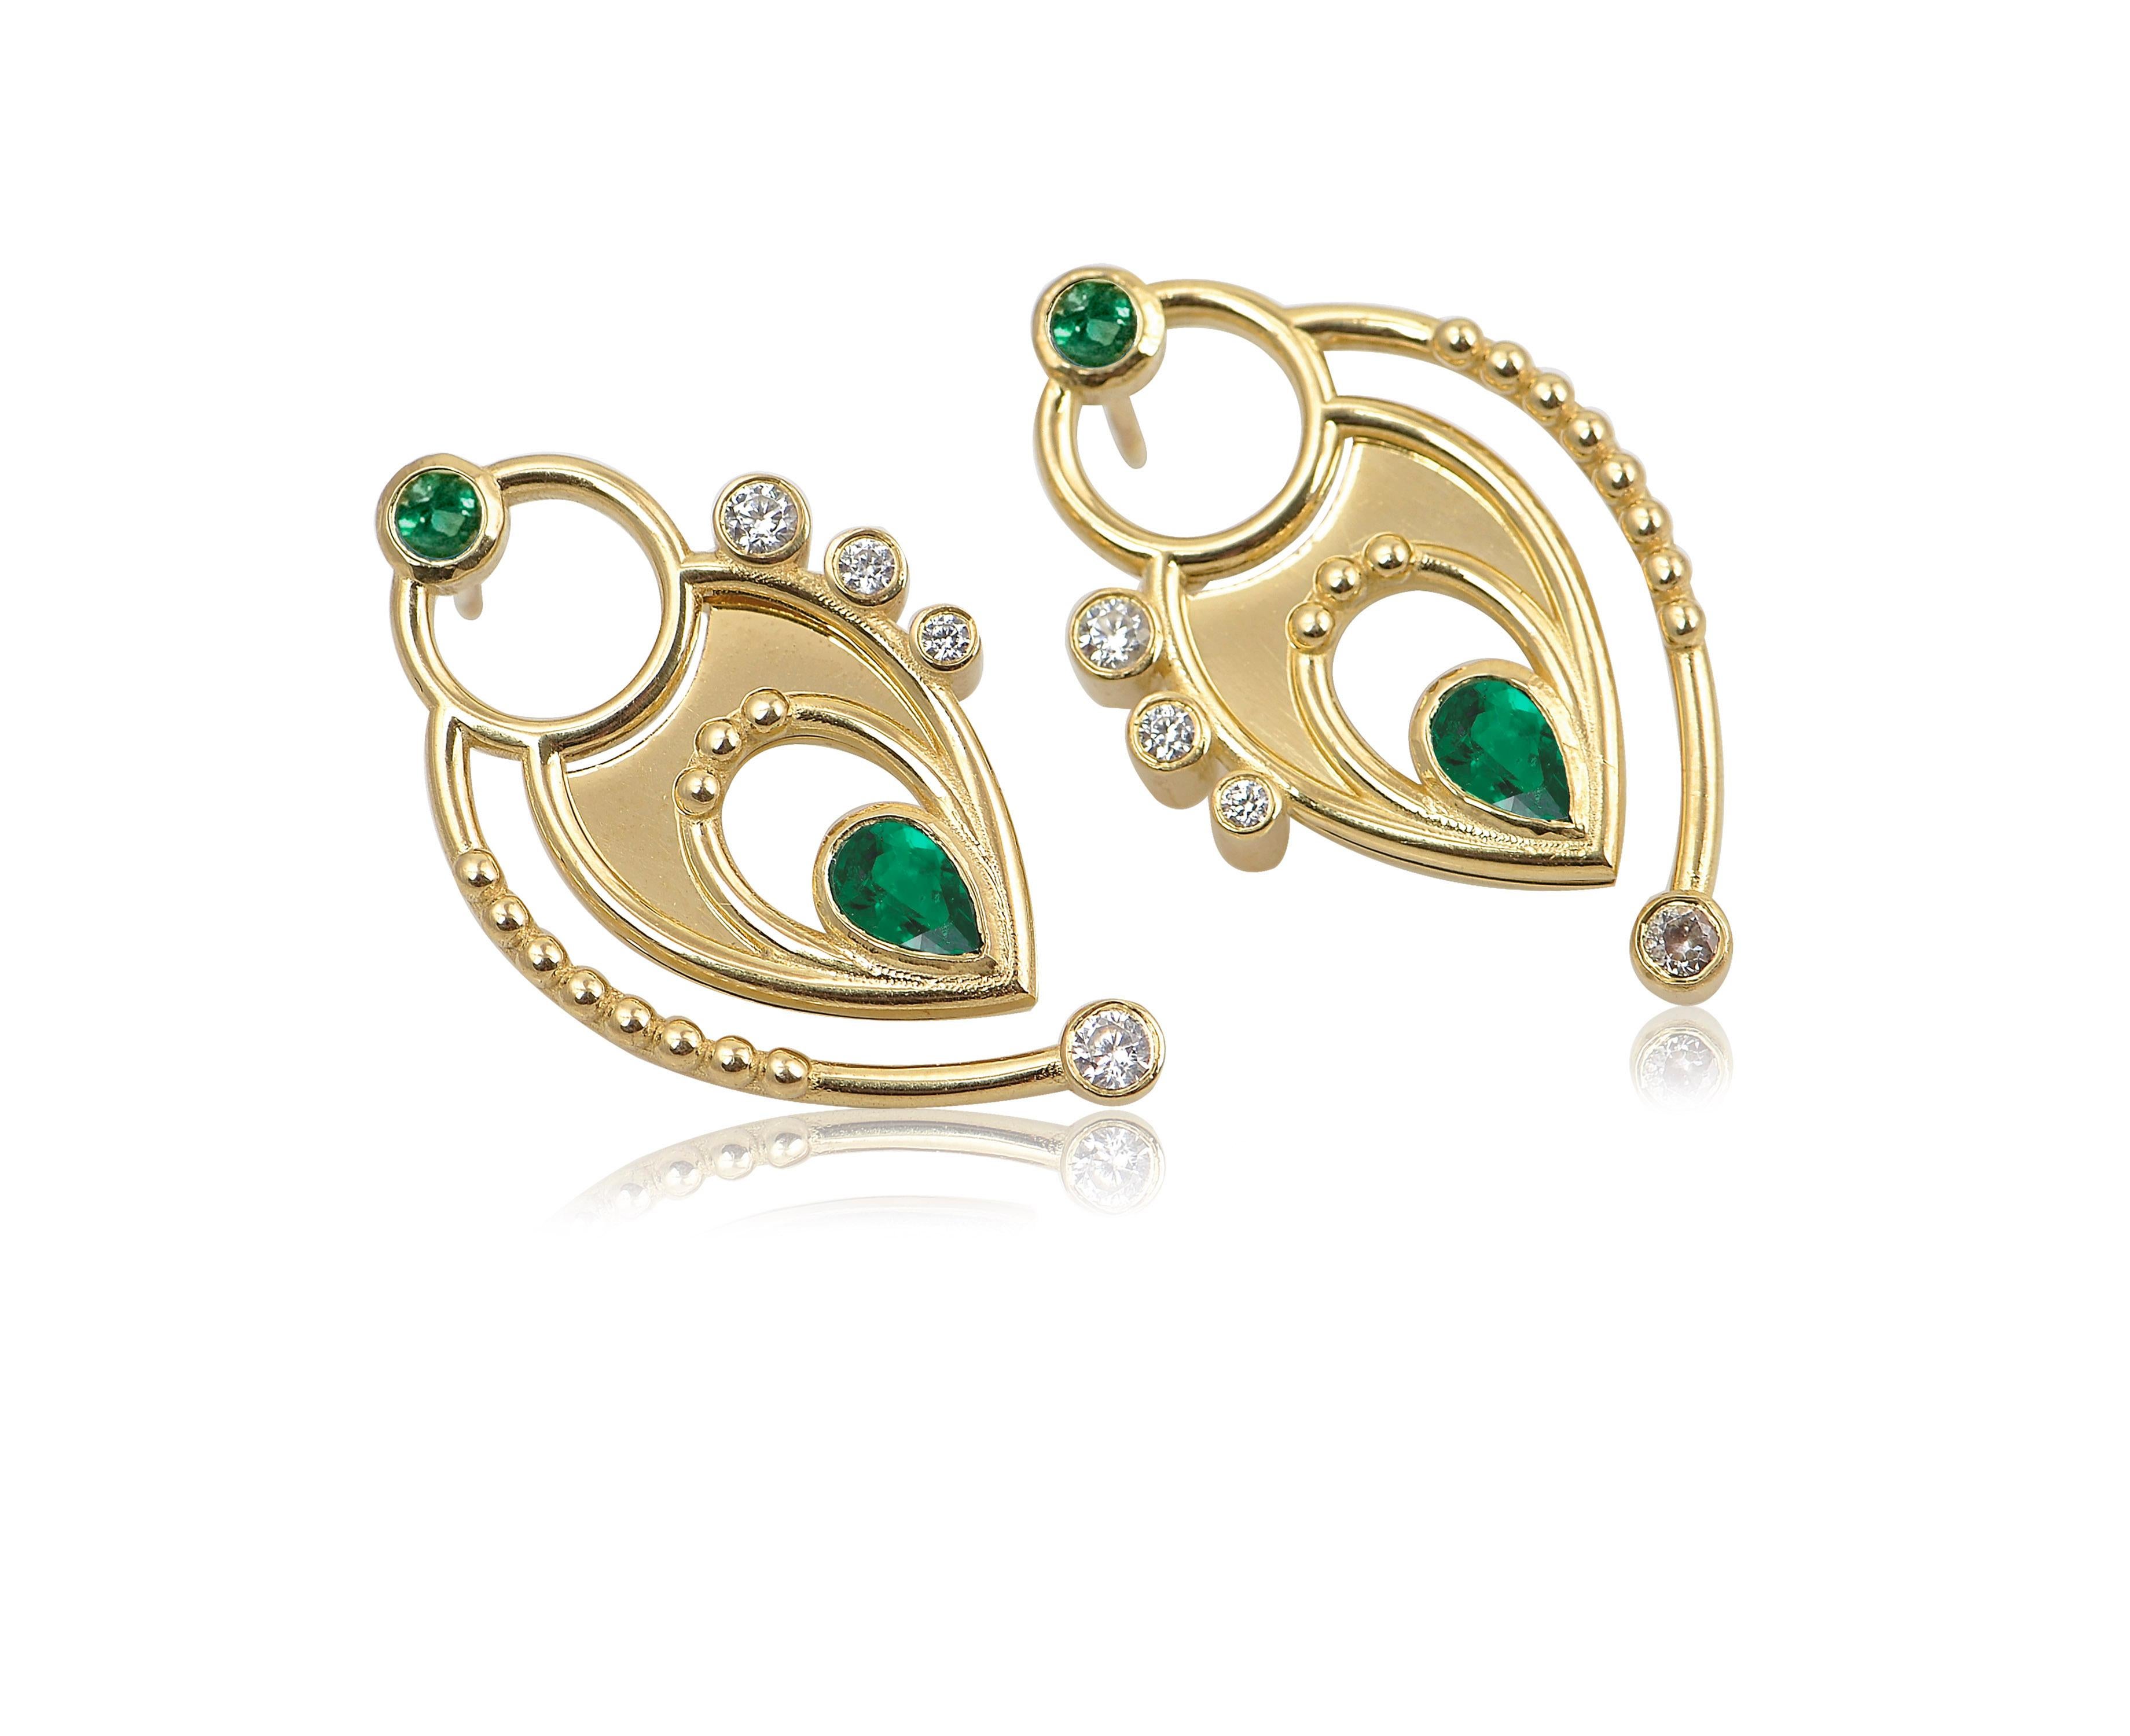 Contemporary Pear Shaped Earrings in 18 Karat Yellow Gold with Diamonds And Emeralds For Sale